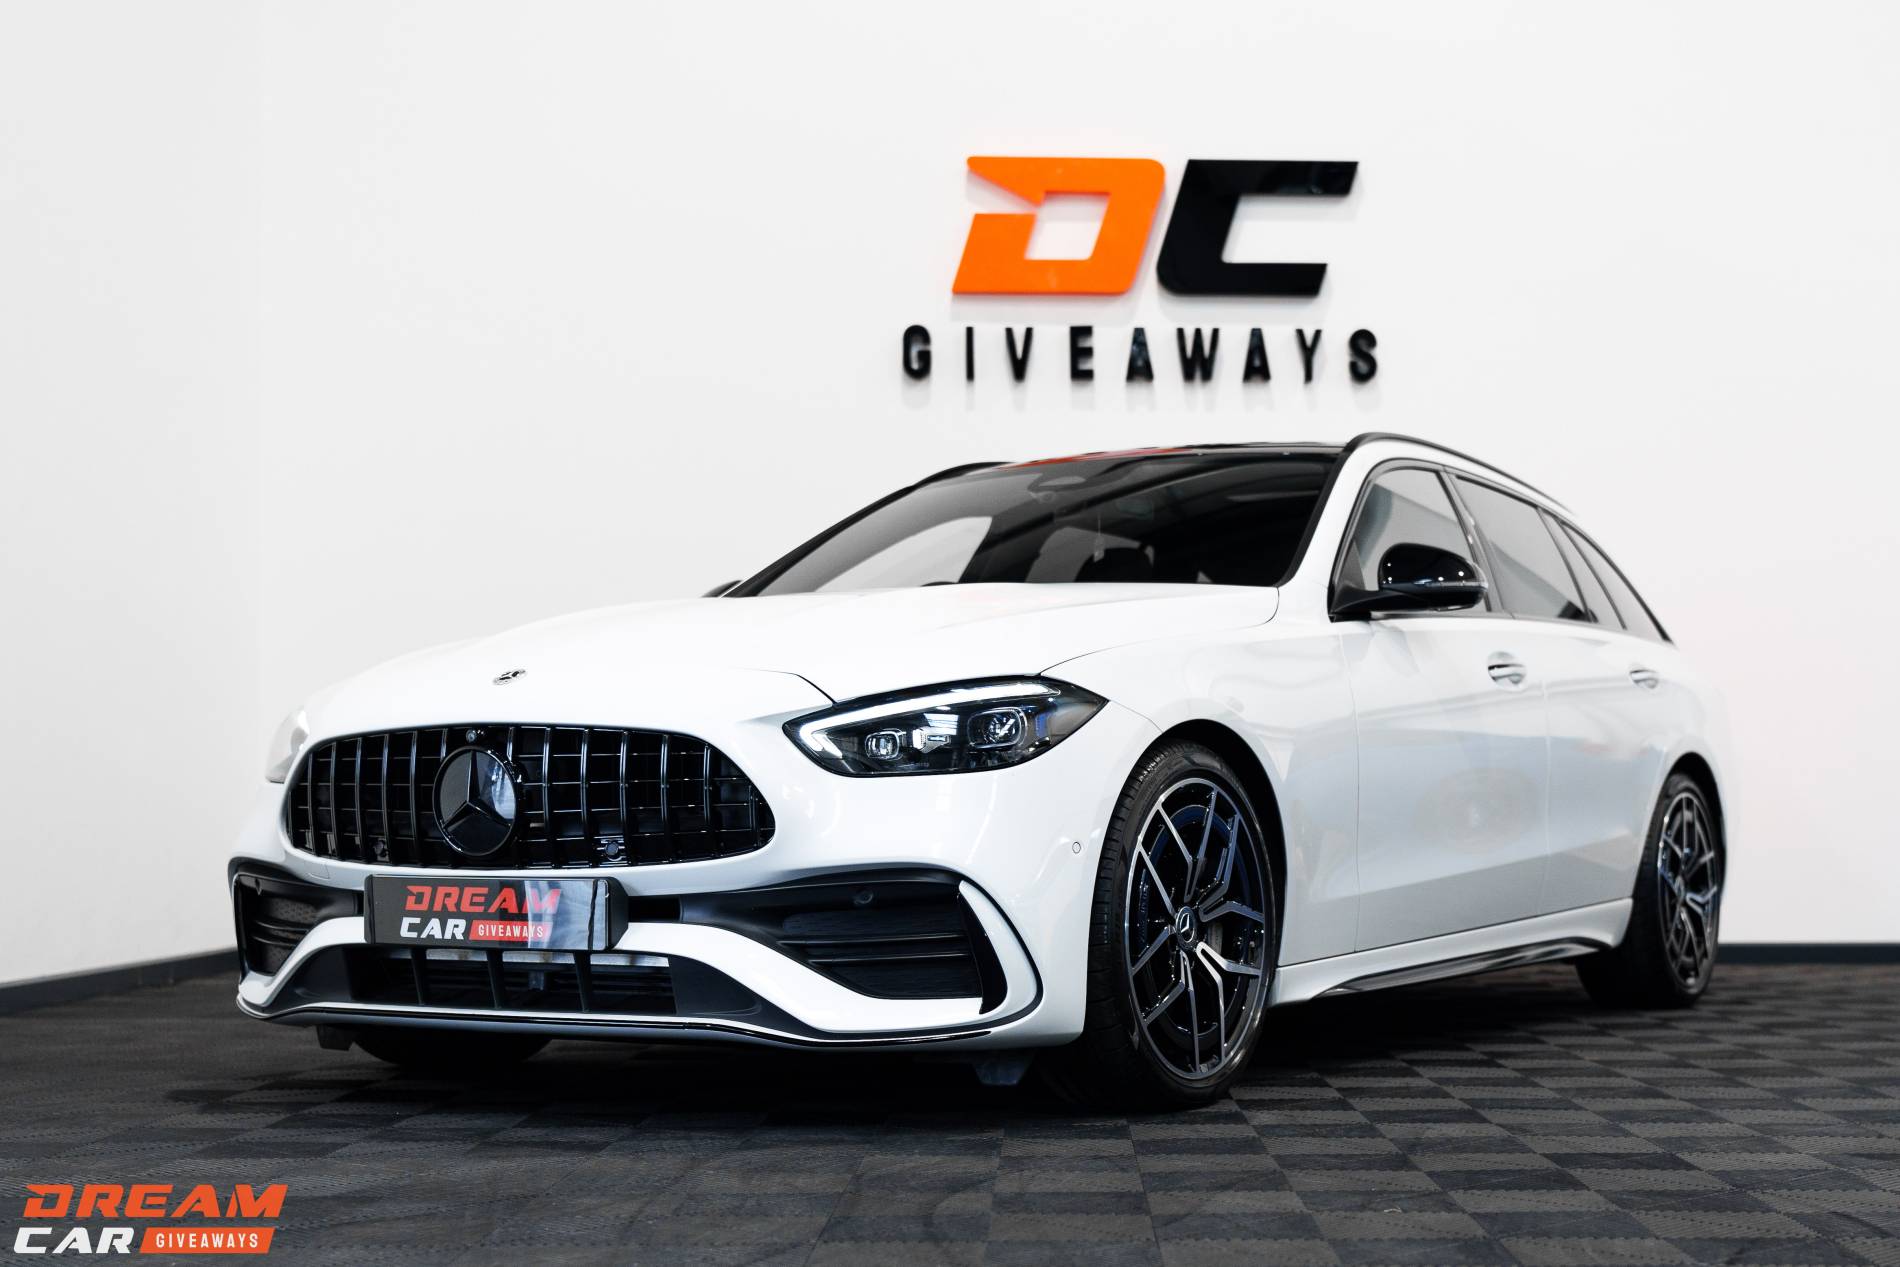 Win this 2022 Mercedes Benz C300 & £1,000 or £36,000 Tax Free